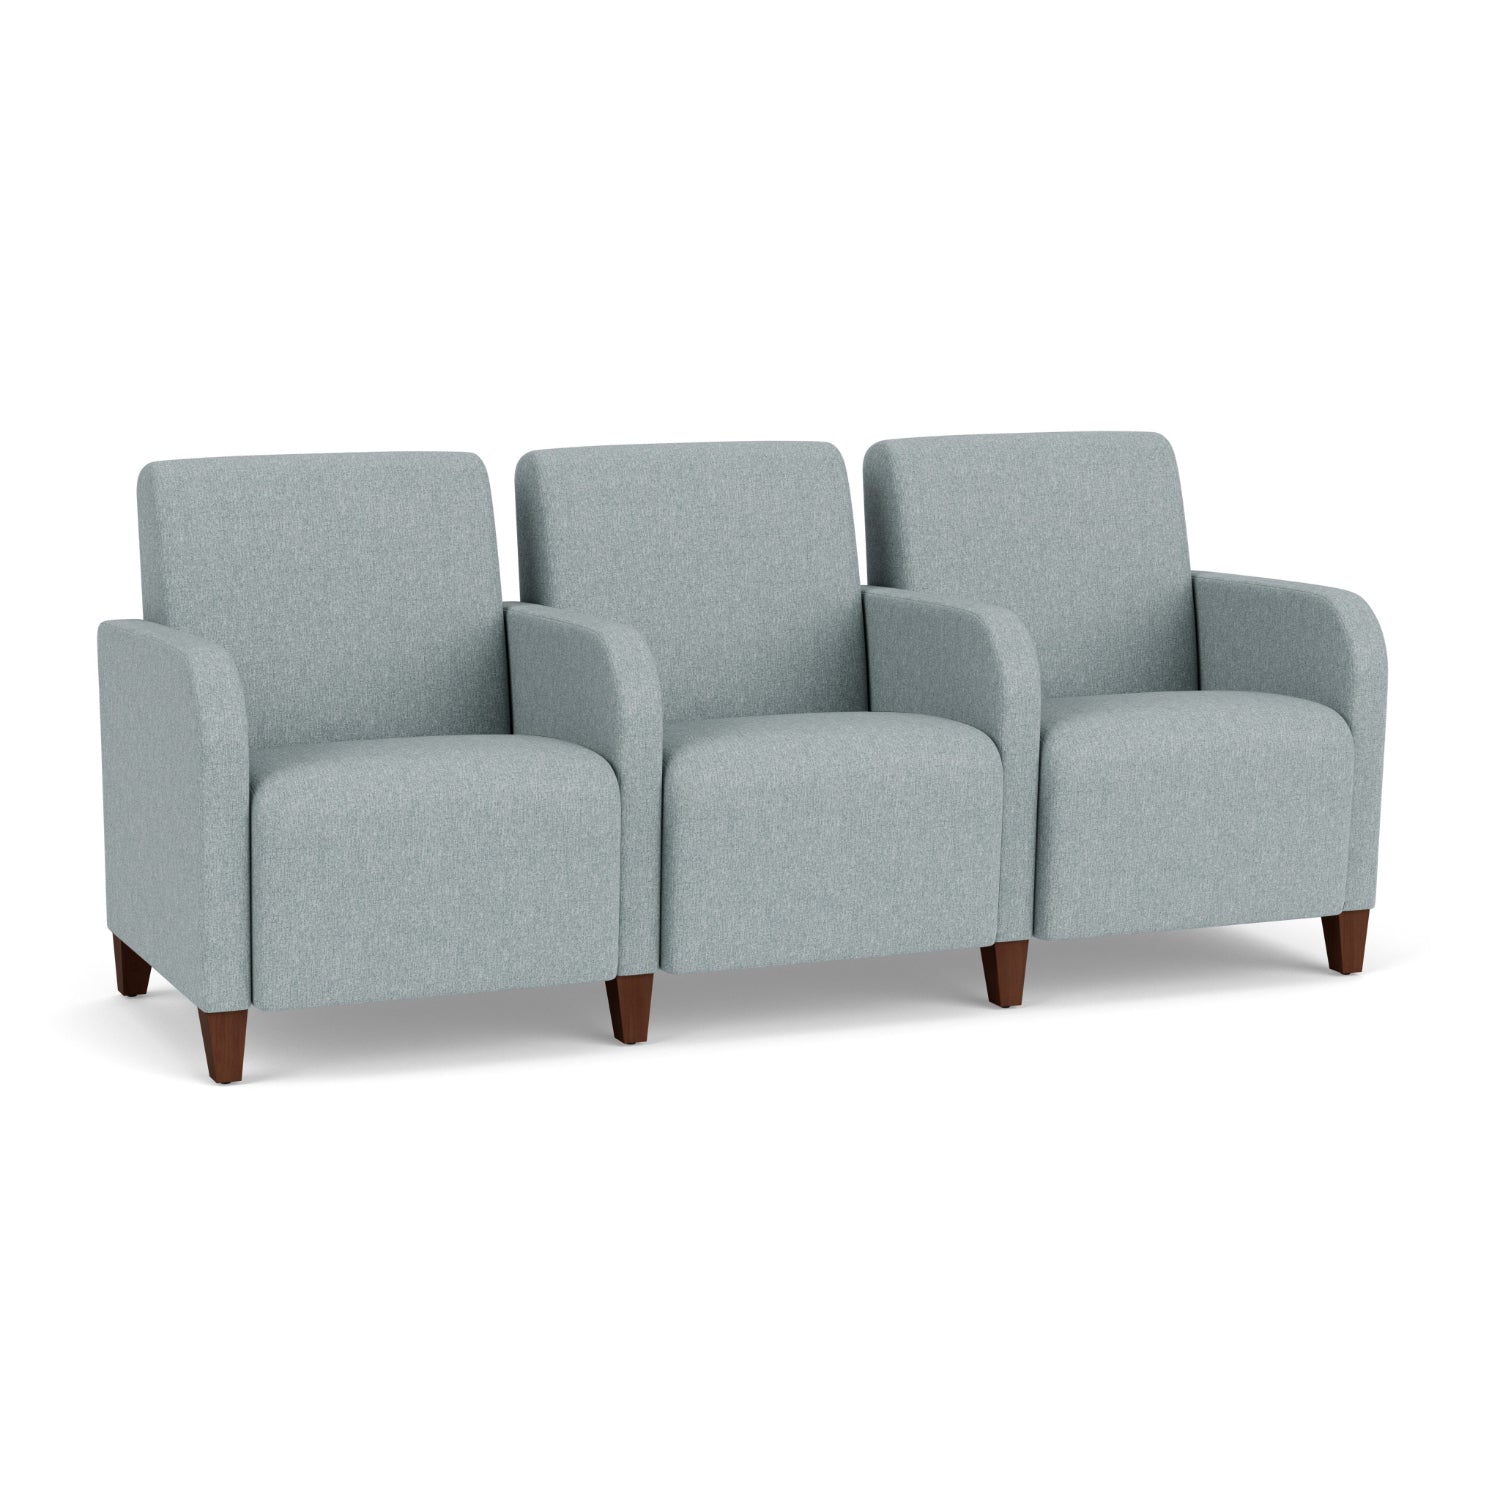 Siena Collection Reception Seating, 3-Seat Sofa with Center Arms, Healthcare Vinyl Upholstery, FREE SHIPPING